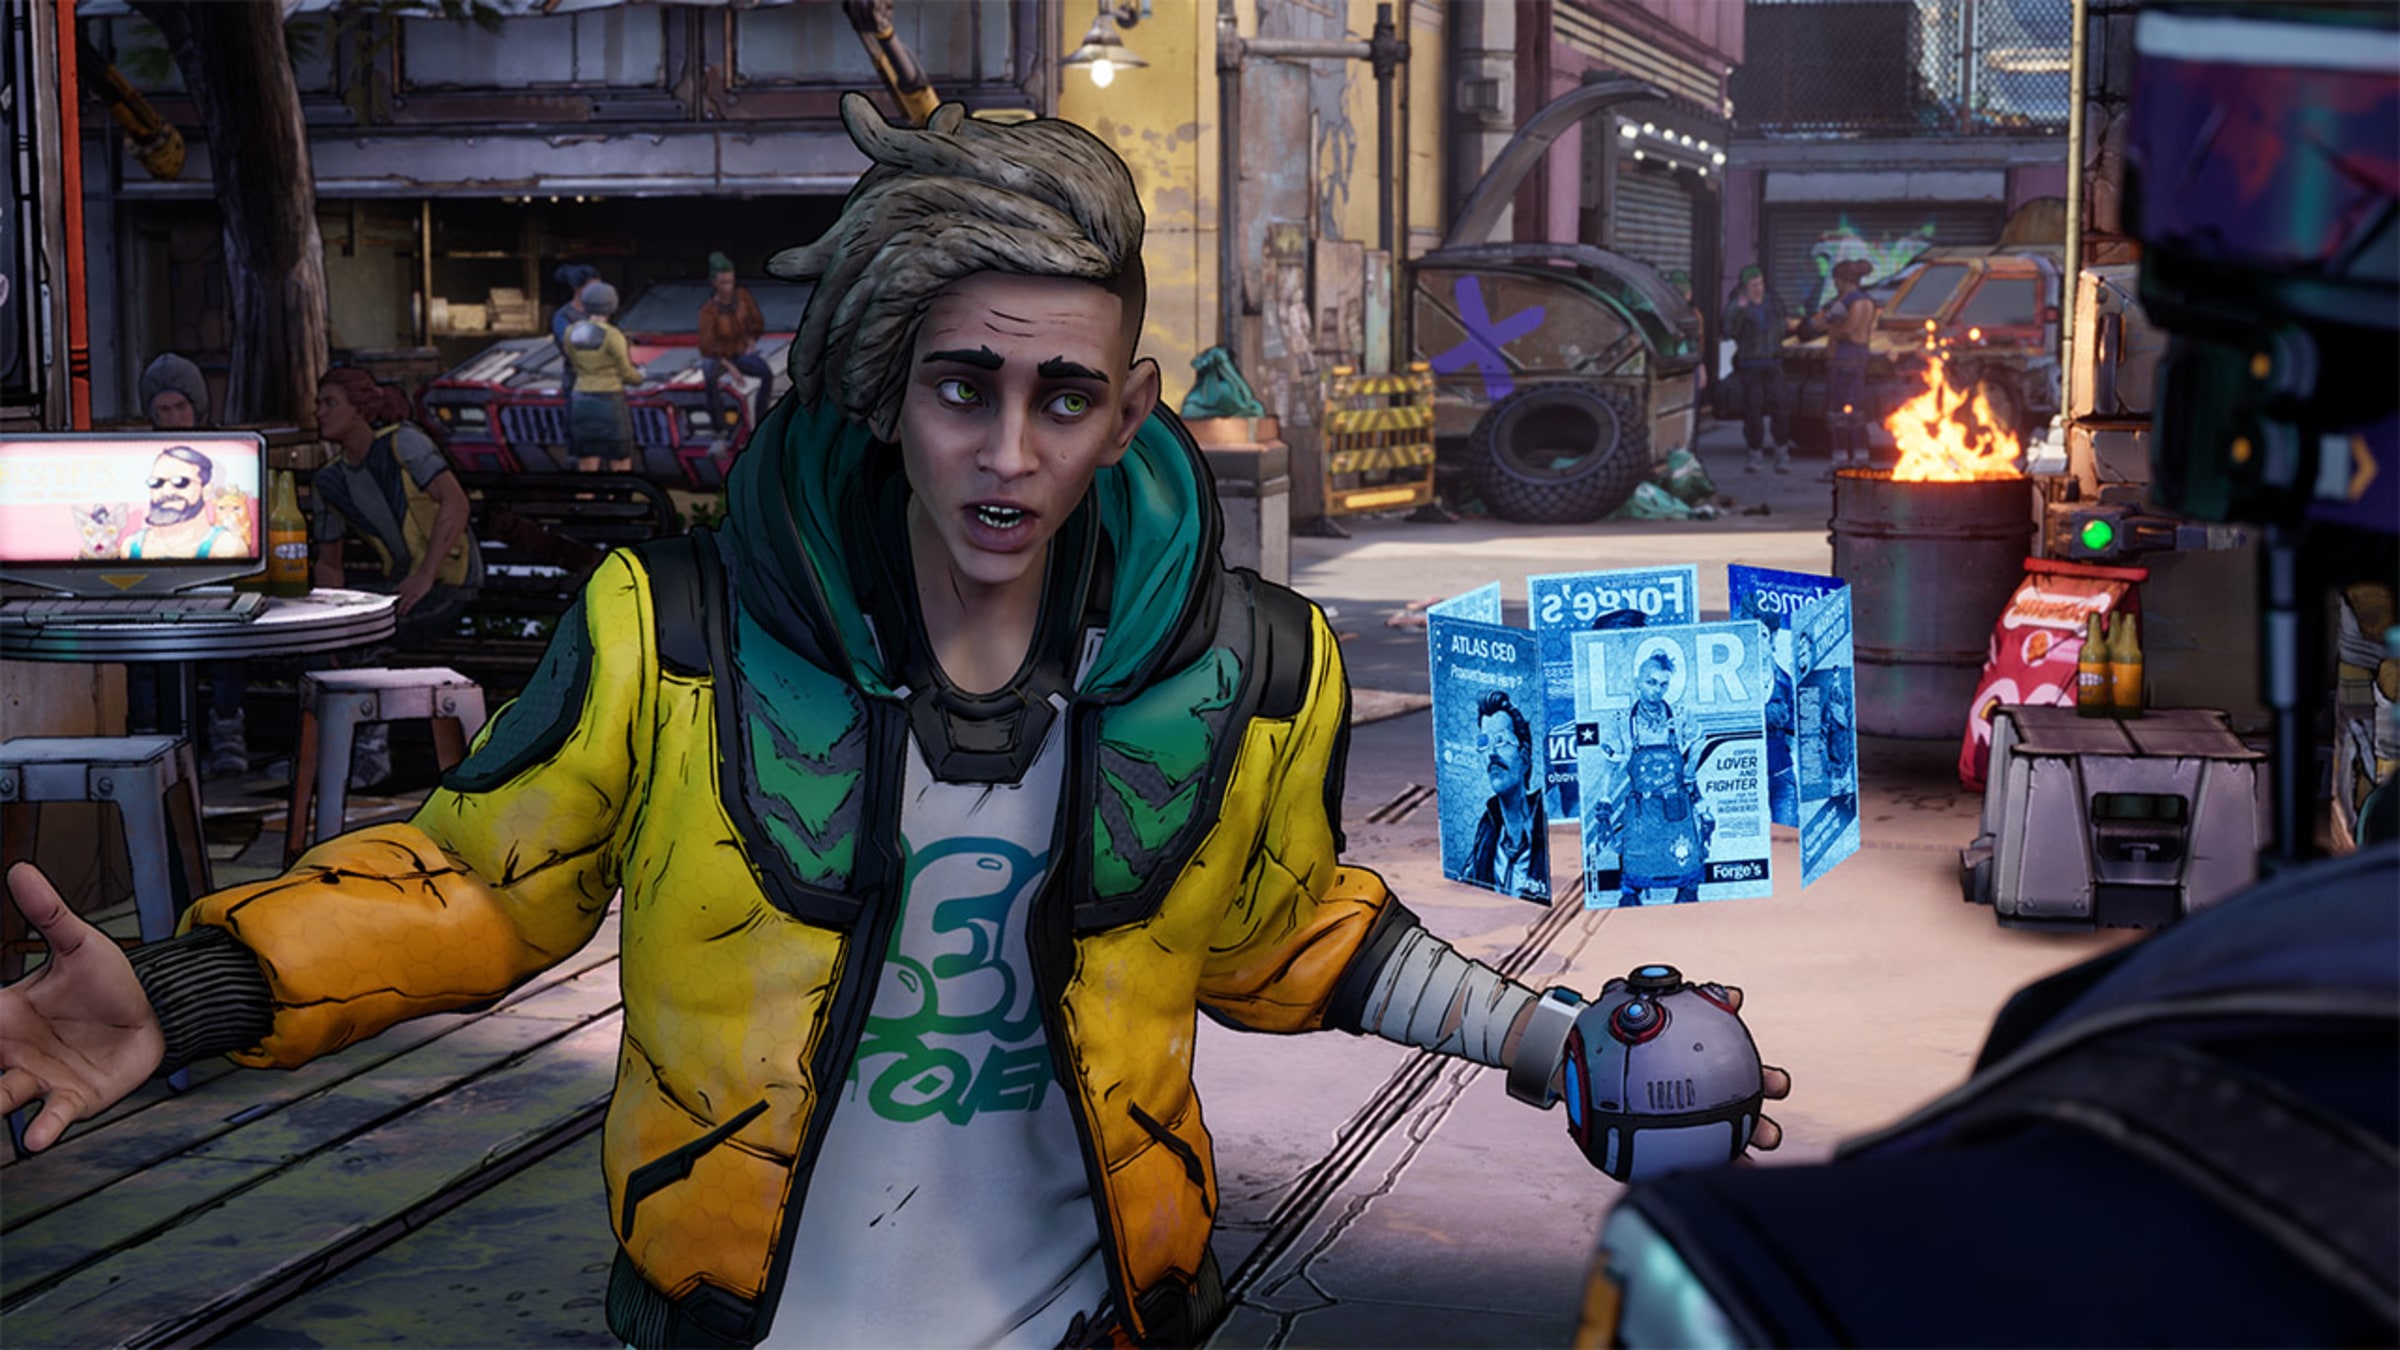 https://assets.nintendo.com/image/upload/c_fill,w_1200/q_auto:best/f_auto/dpr_2.0/ncom/en_US/games/switch/n/new-tales-from-the-borderlands-switch/